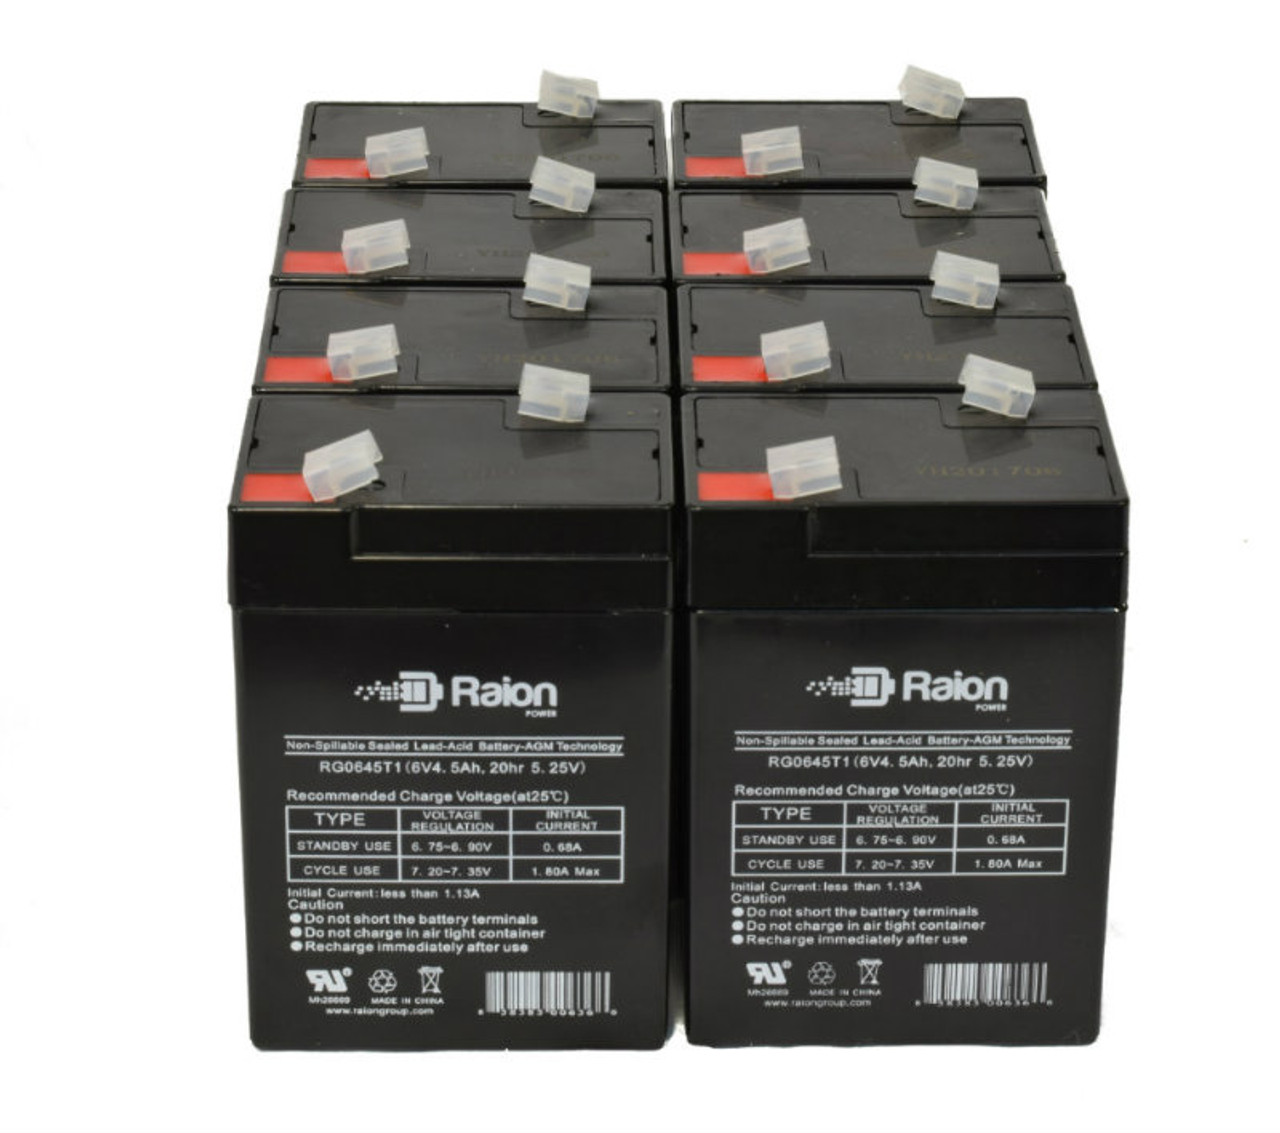 Raion Power 6 Volt 4.5Ah RG0645T1 Replacement Battery for Expocell P206/45 - 8 Pack